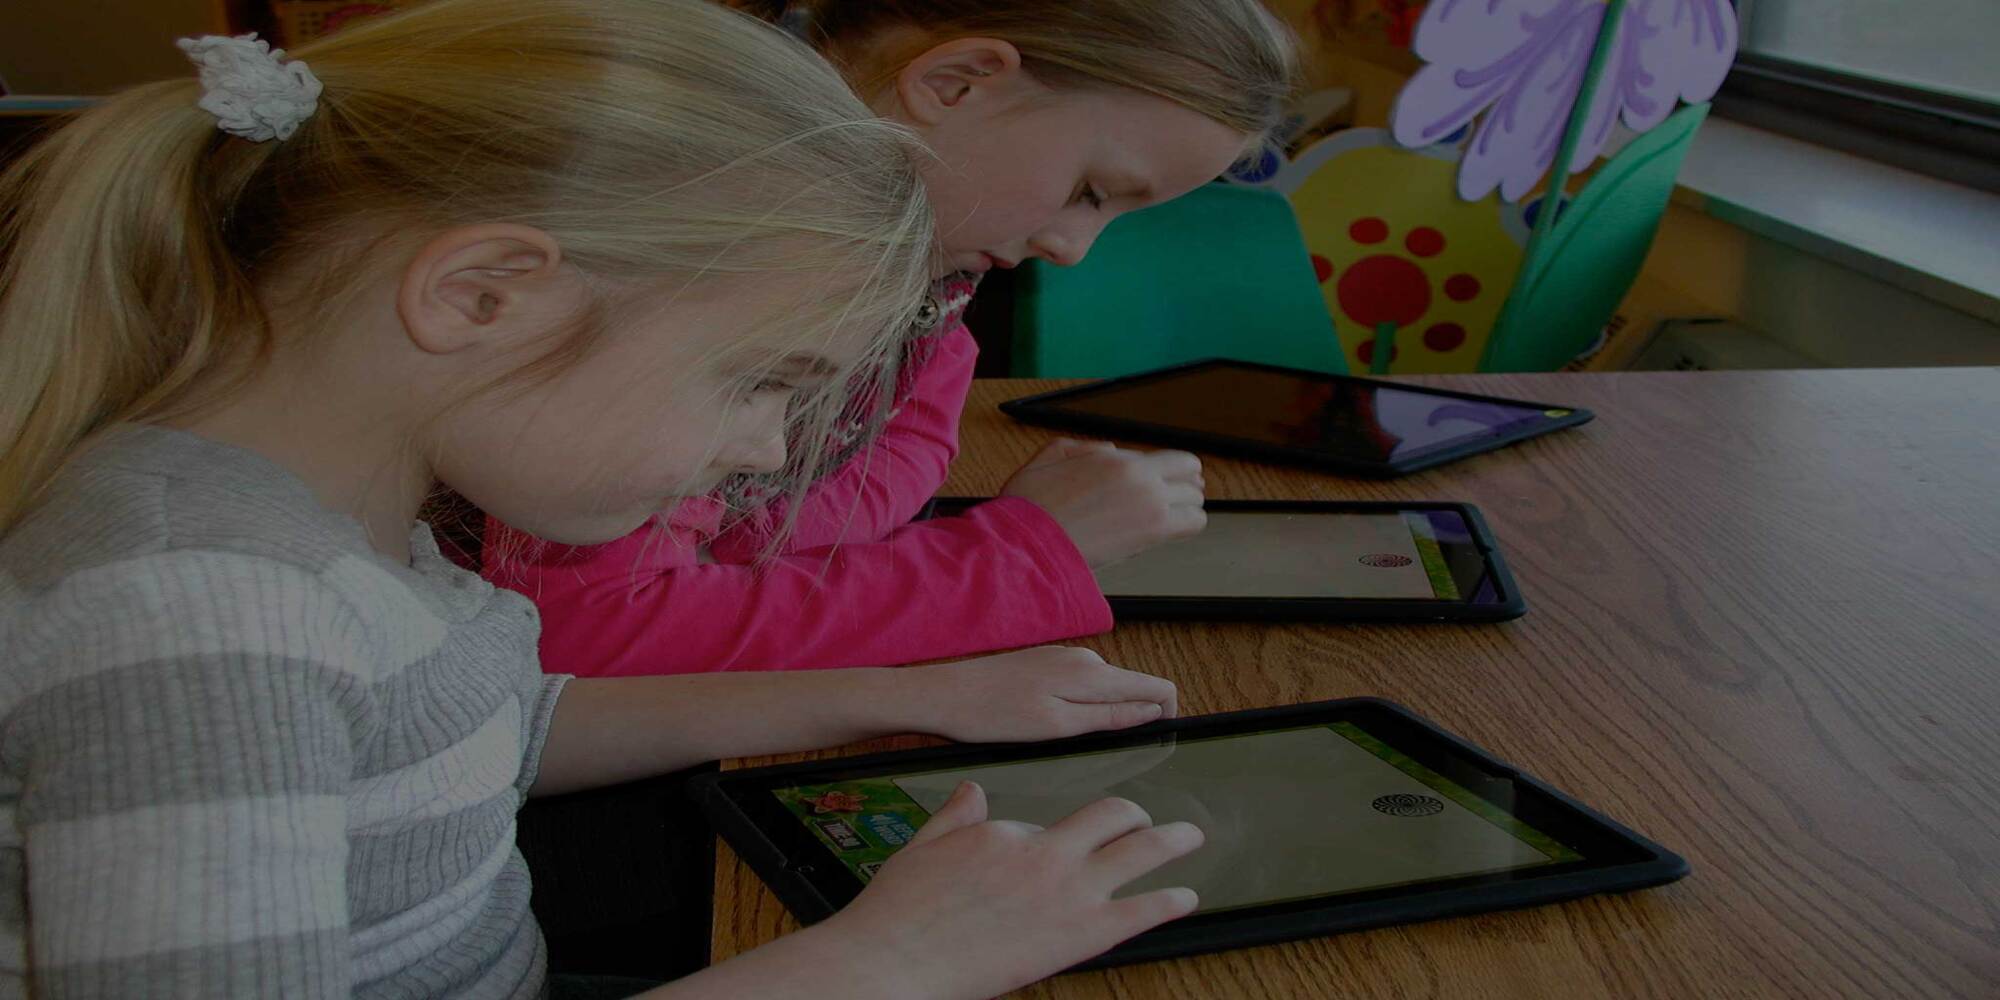 Students using iPads in the classroom at their desks